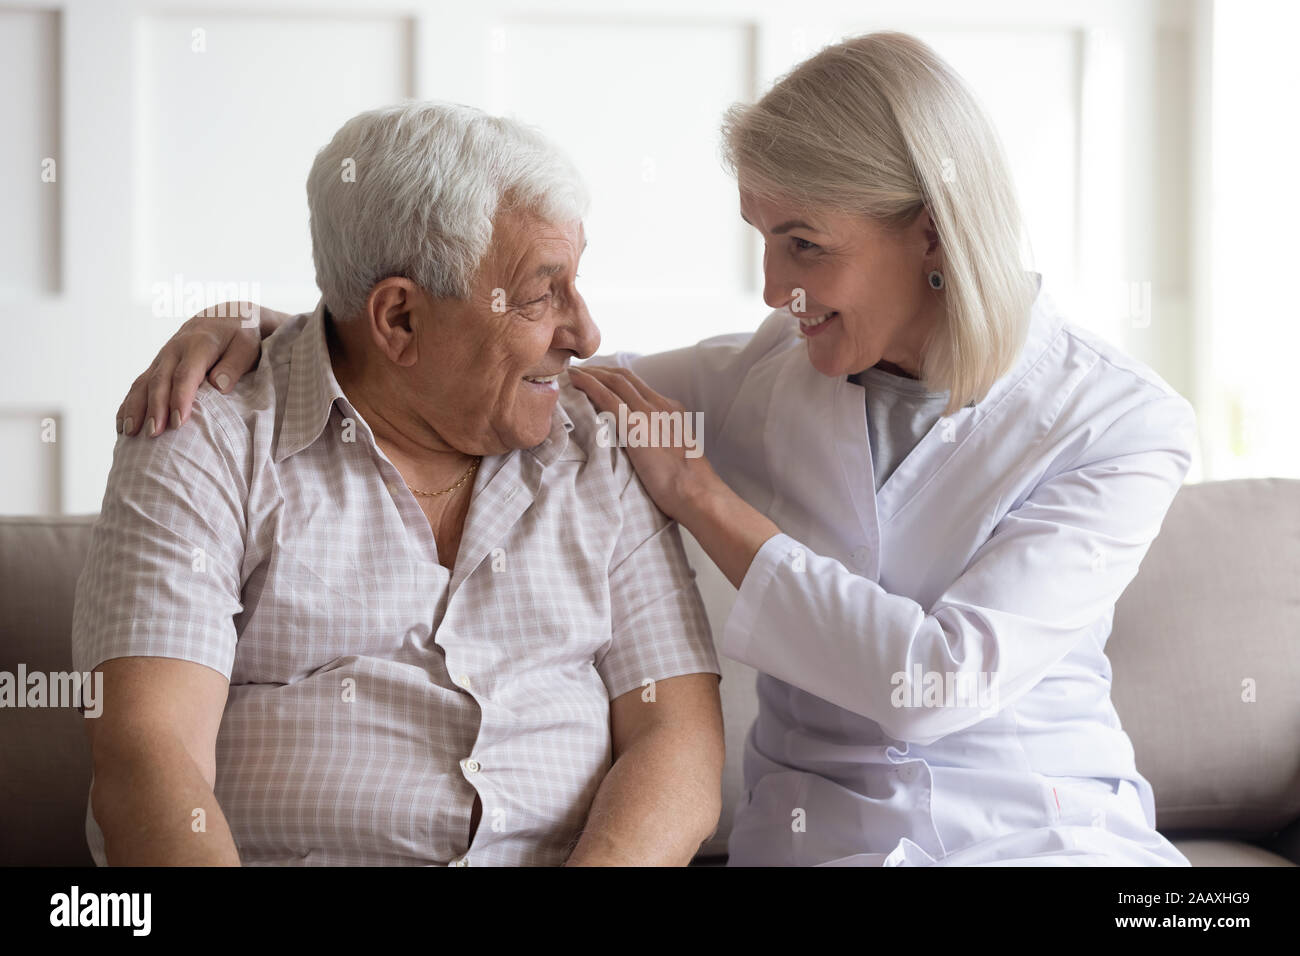 Mature female doctor showing care to elder male patient. Stock Photo